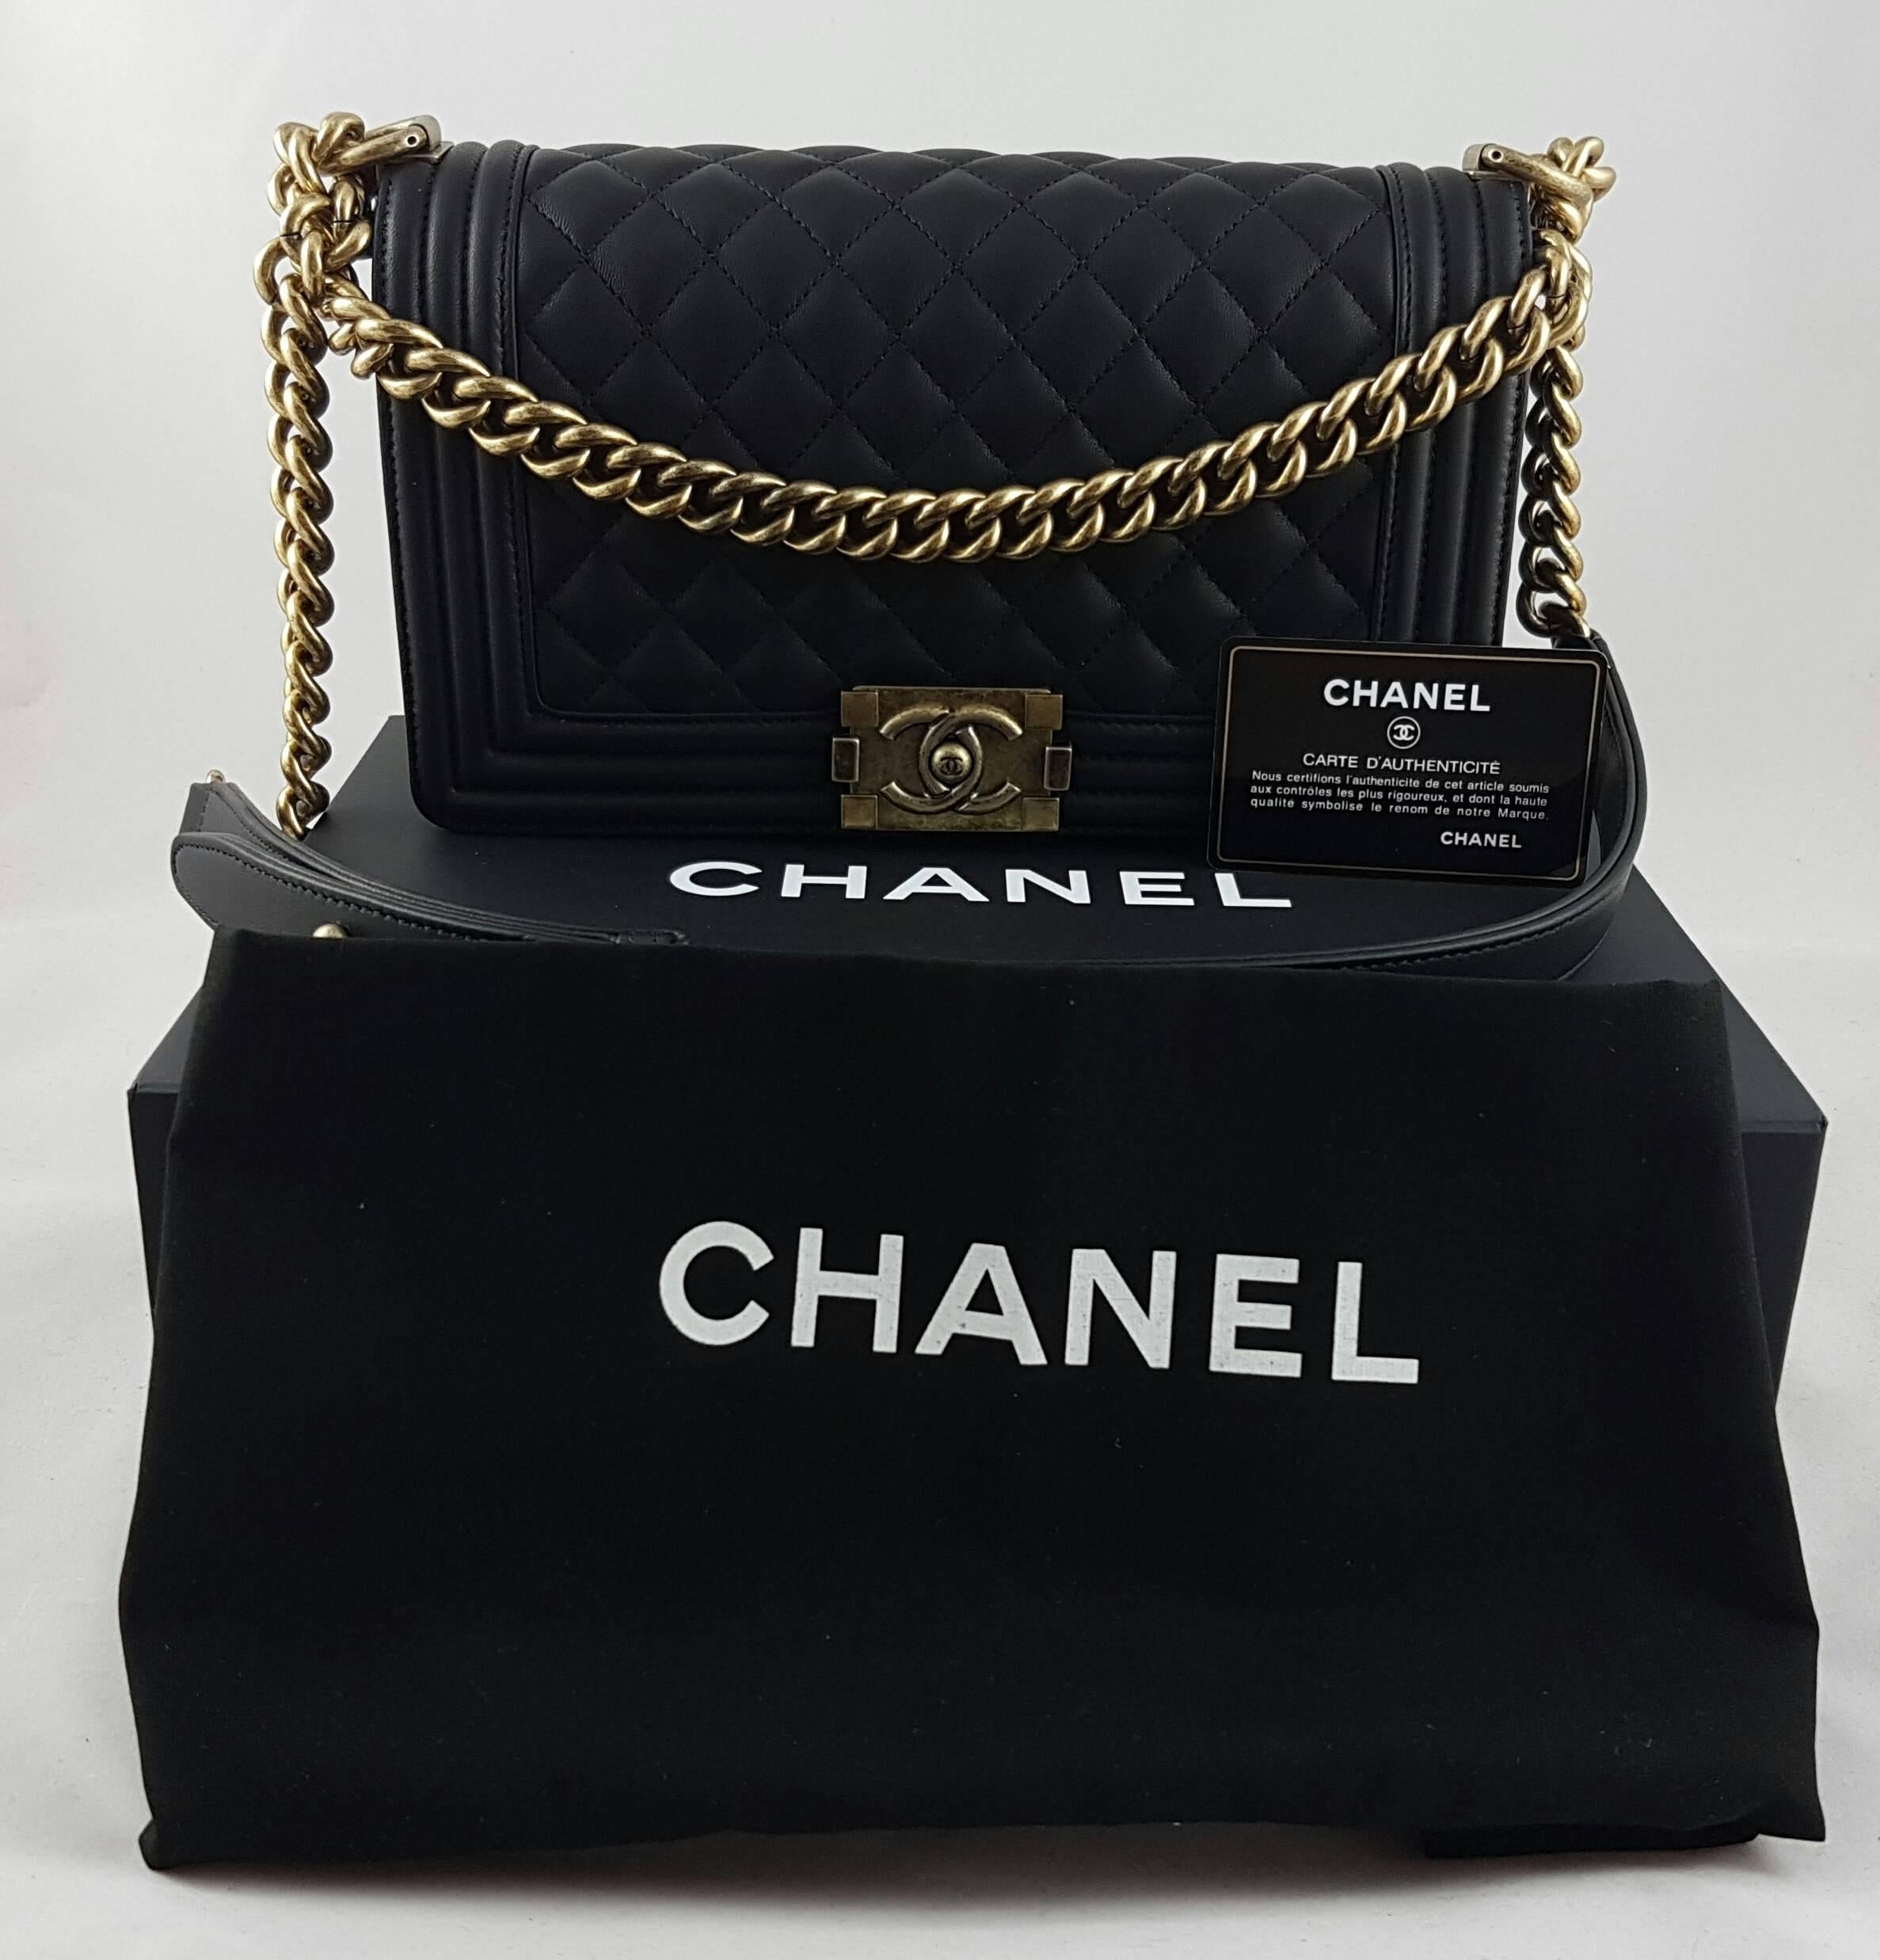 Chanel Boy Old Medium Black with Antique Gold Hardware Shoulder Bag

Impeccable condition with box, dustbag and card.
Made in Italy.